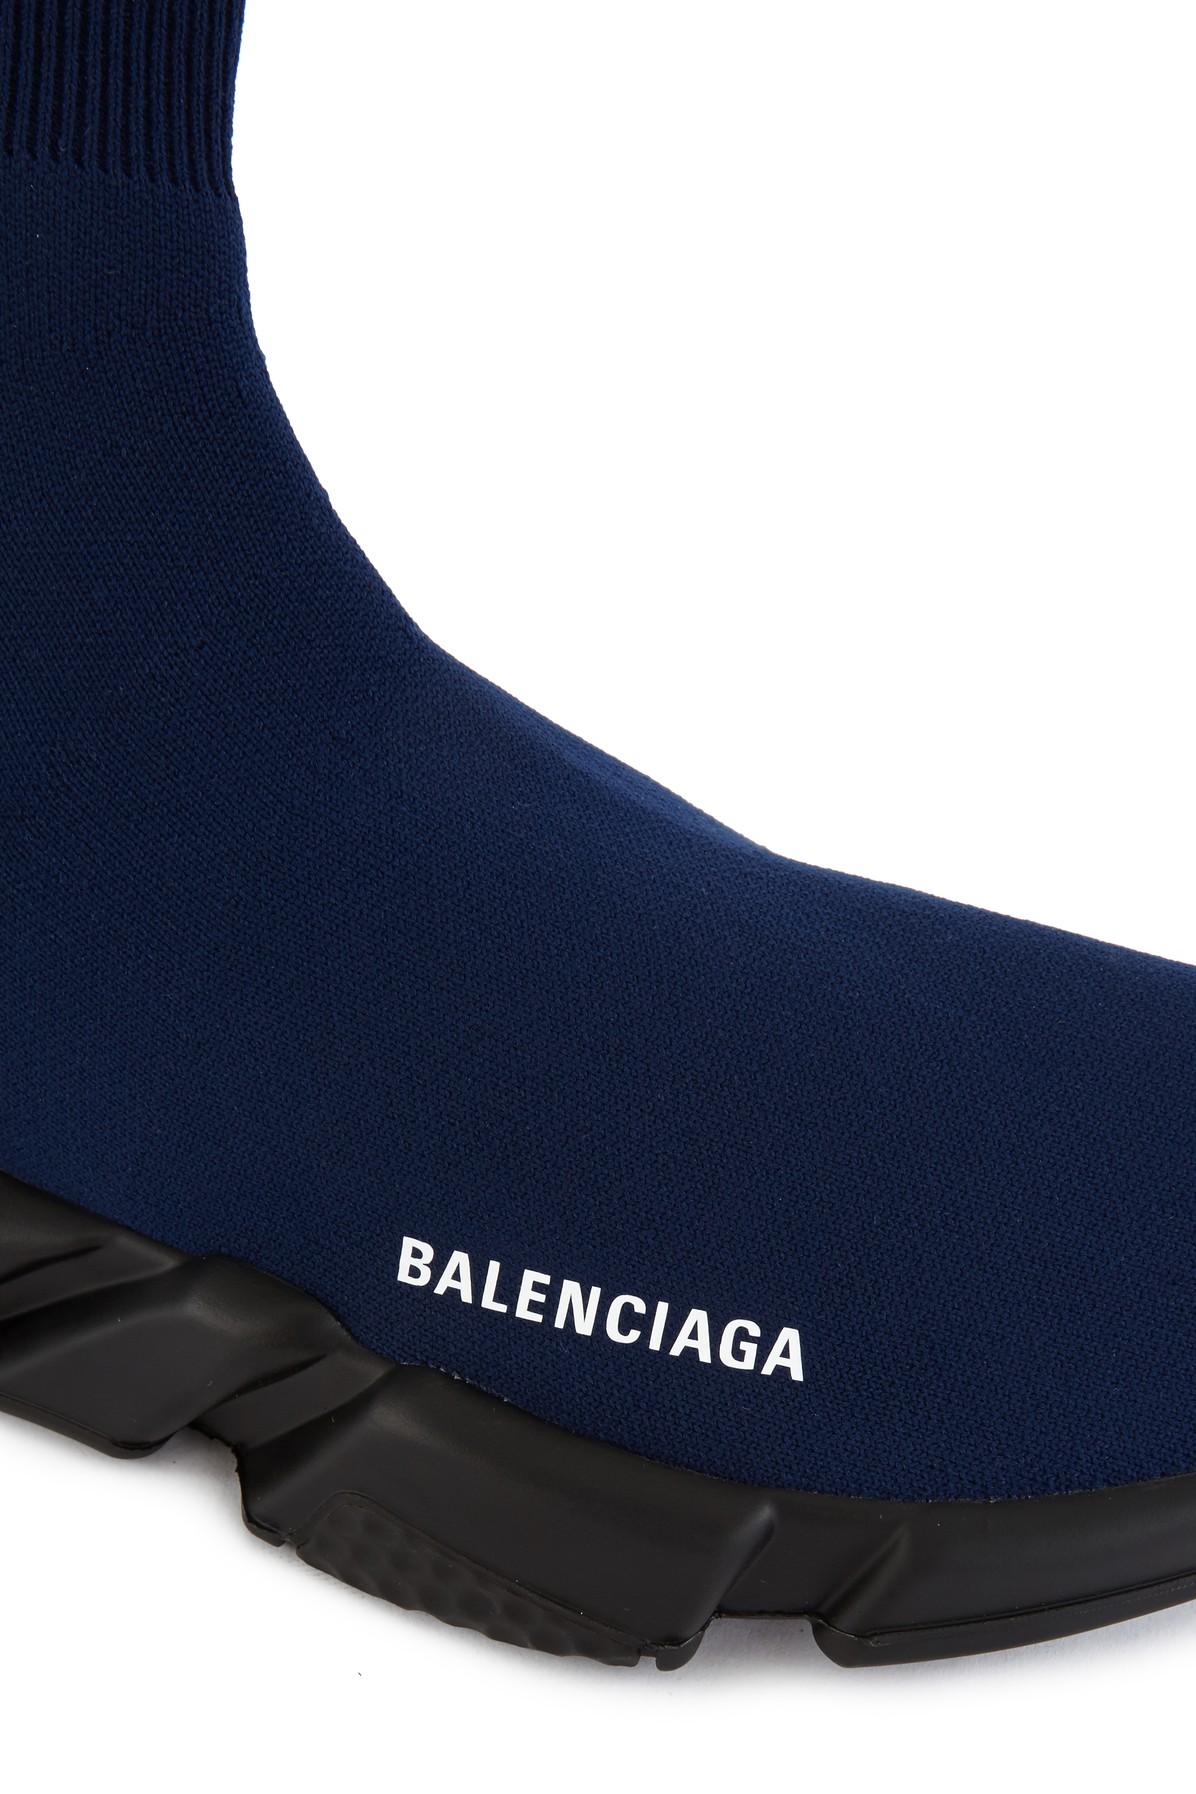 Balenciaga Speed Sock Logo Trainers in Navy (Blue) for Men - Lyst